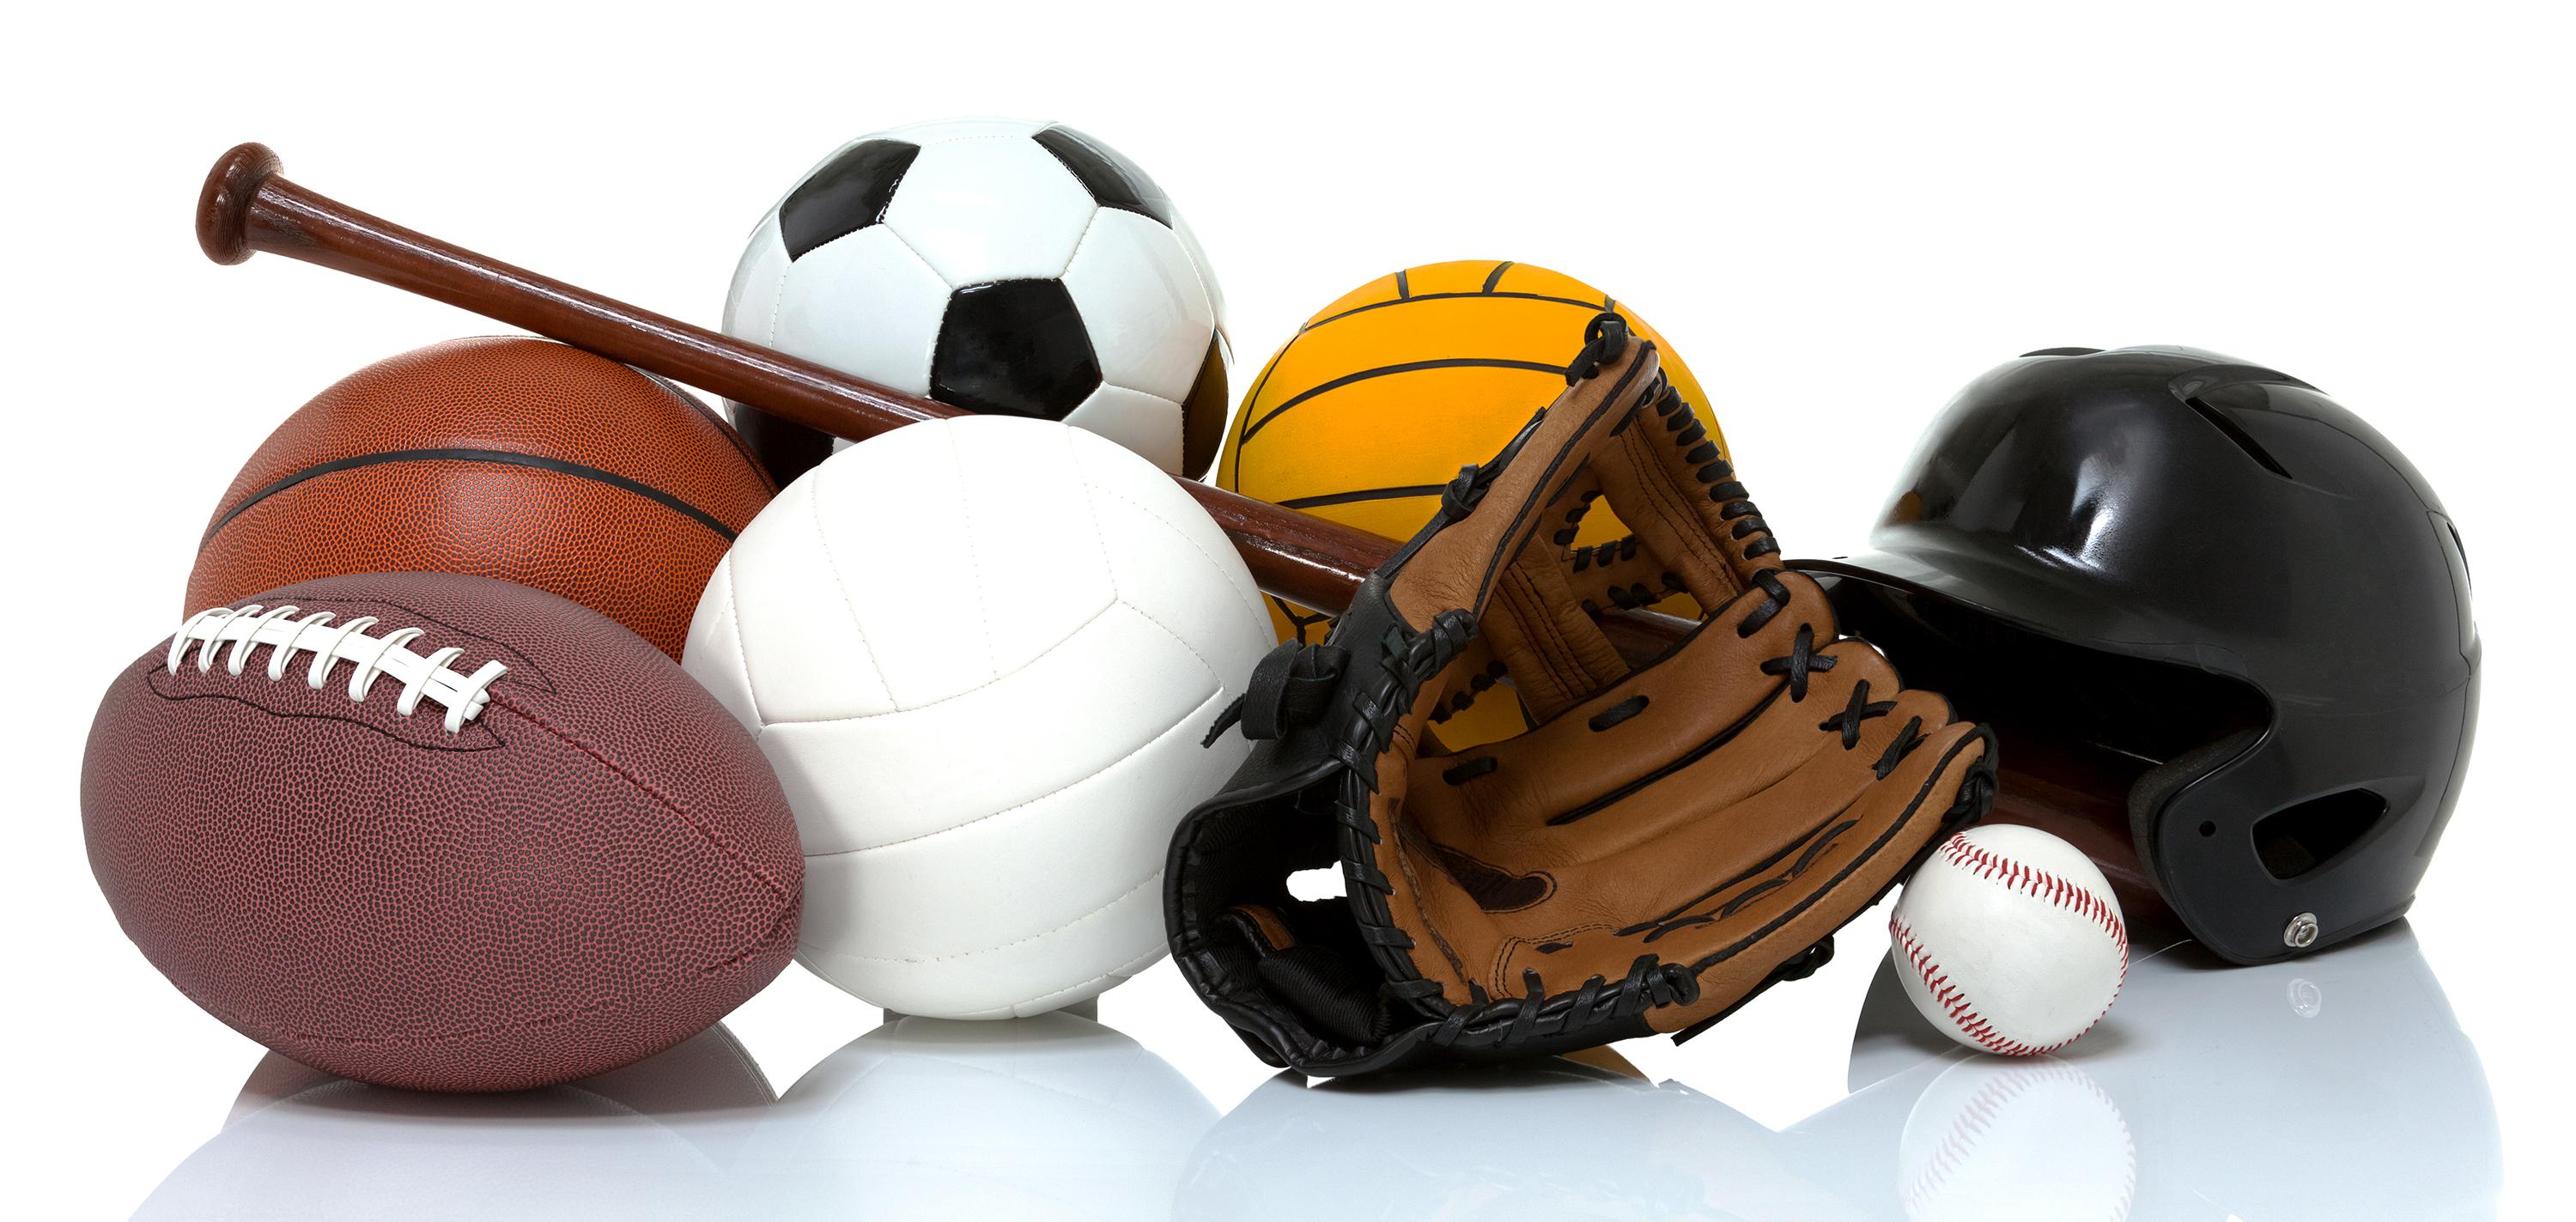 Assorted sports equipment, professional photo and design